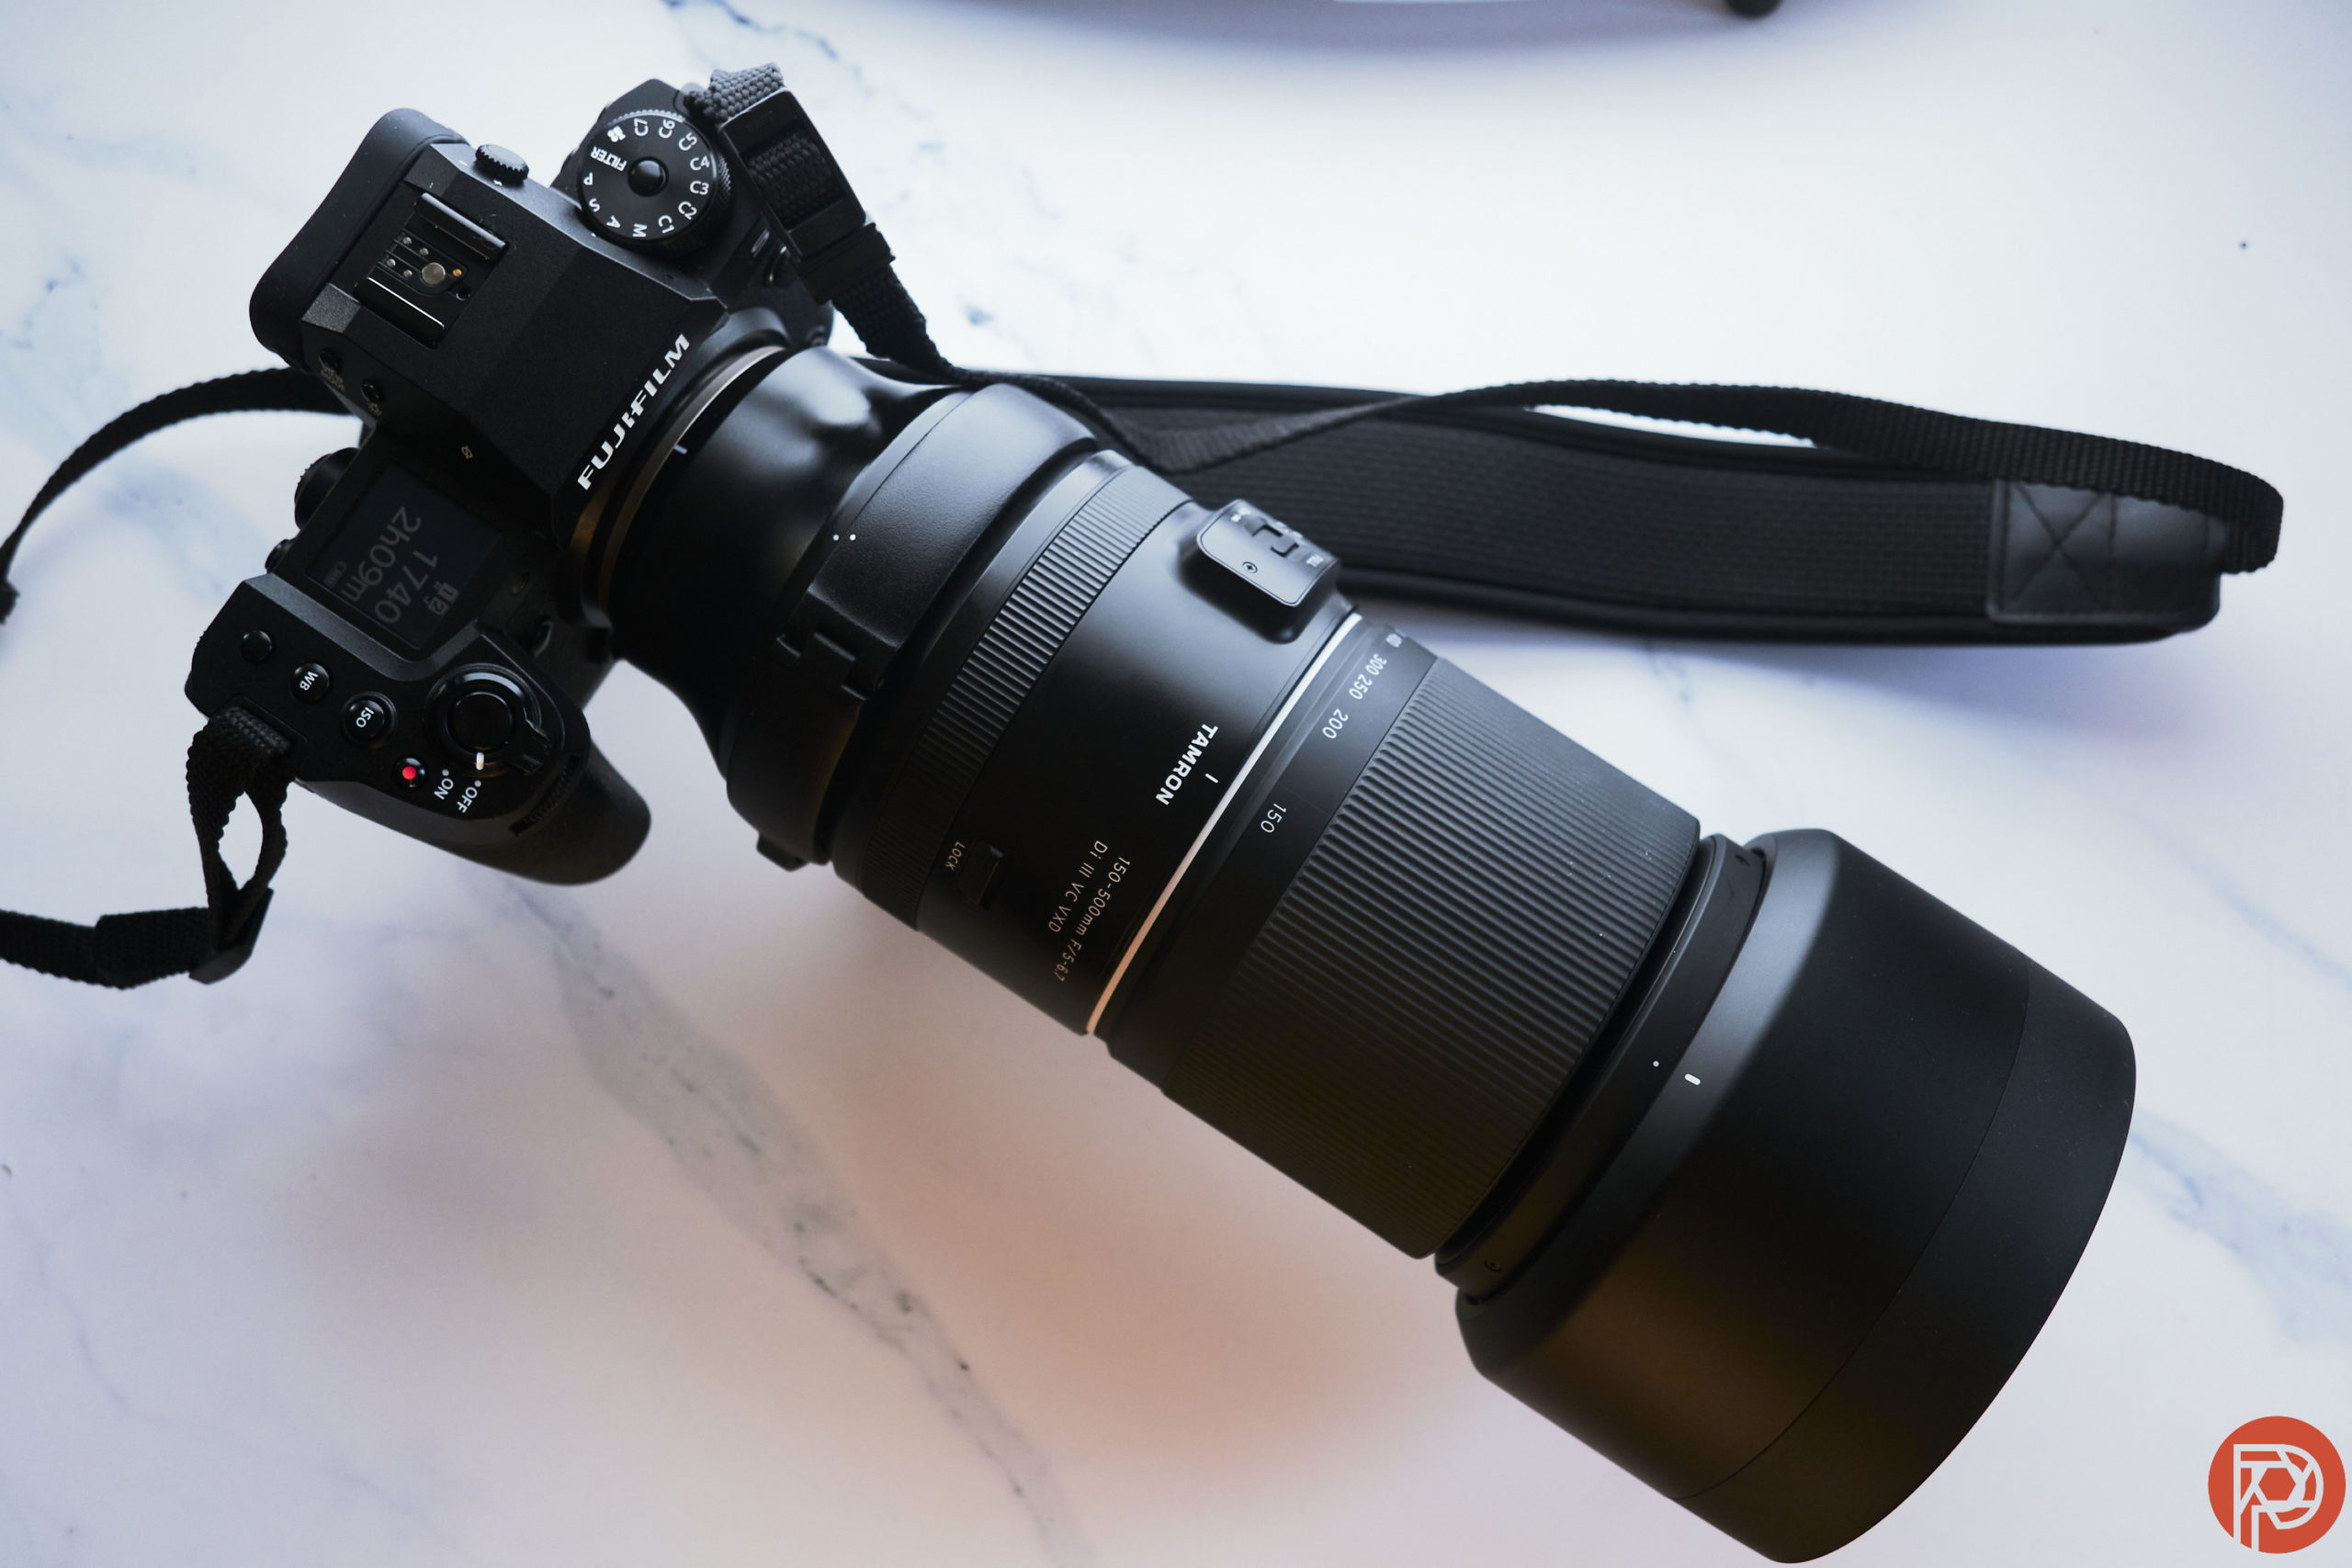 How Great Is the Tamron 150-500mm on Fujifilm?